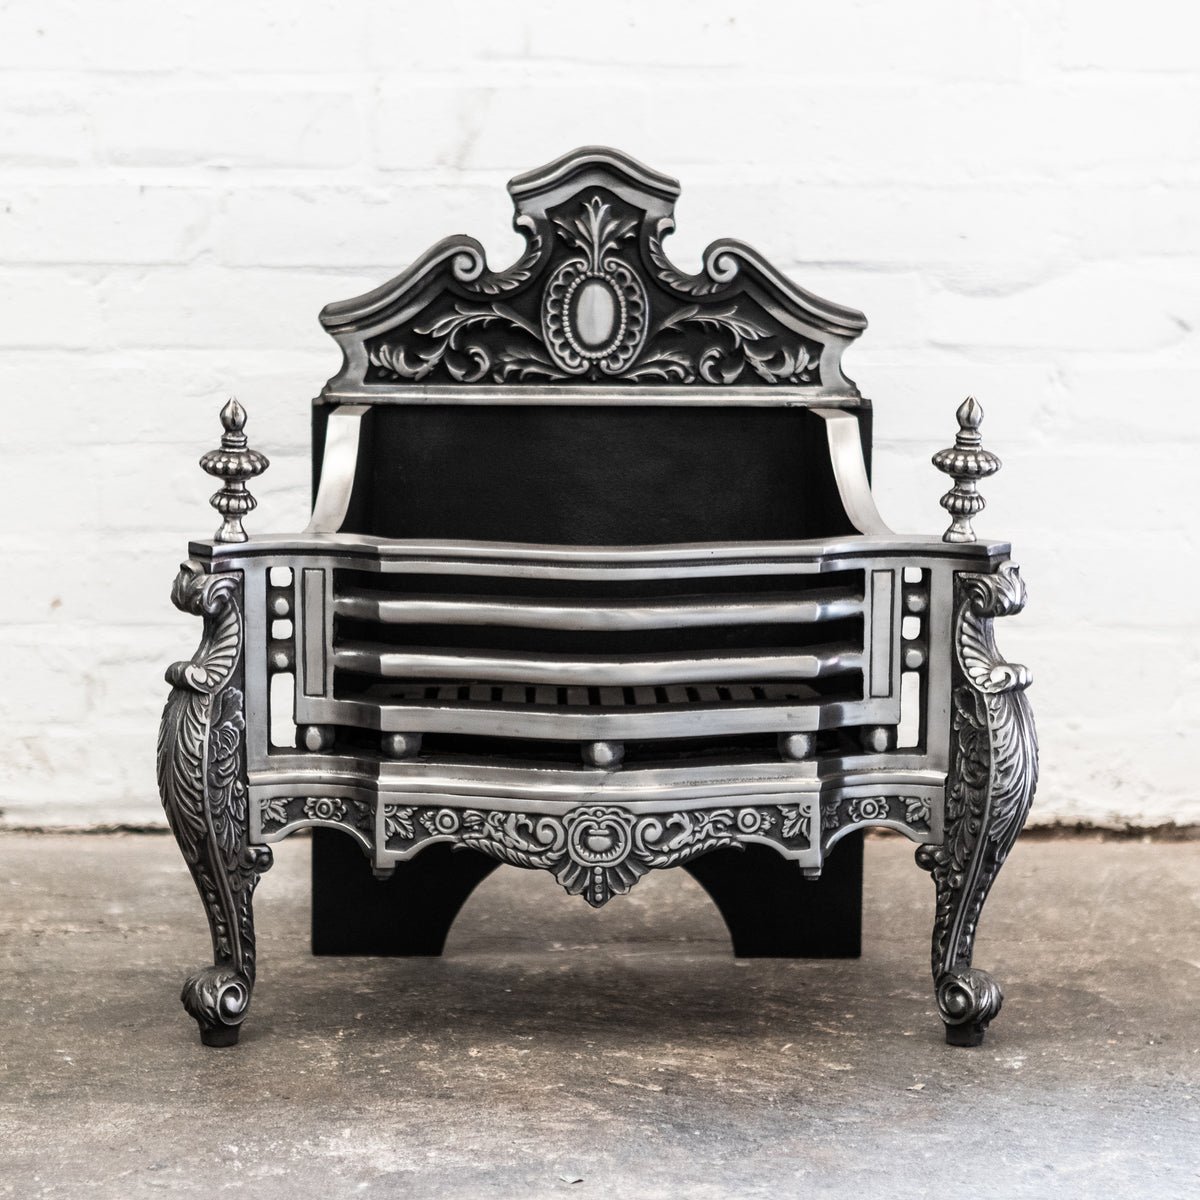 Reclaimed Very Ornate Queen Anne Style Fire Basket | The Architectural Forum